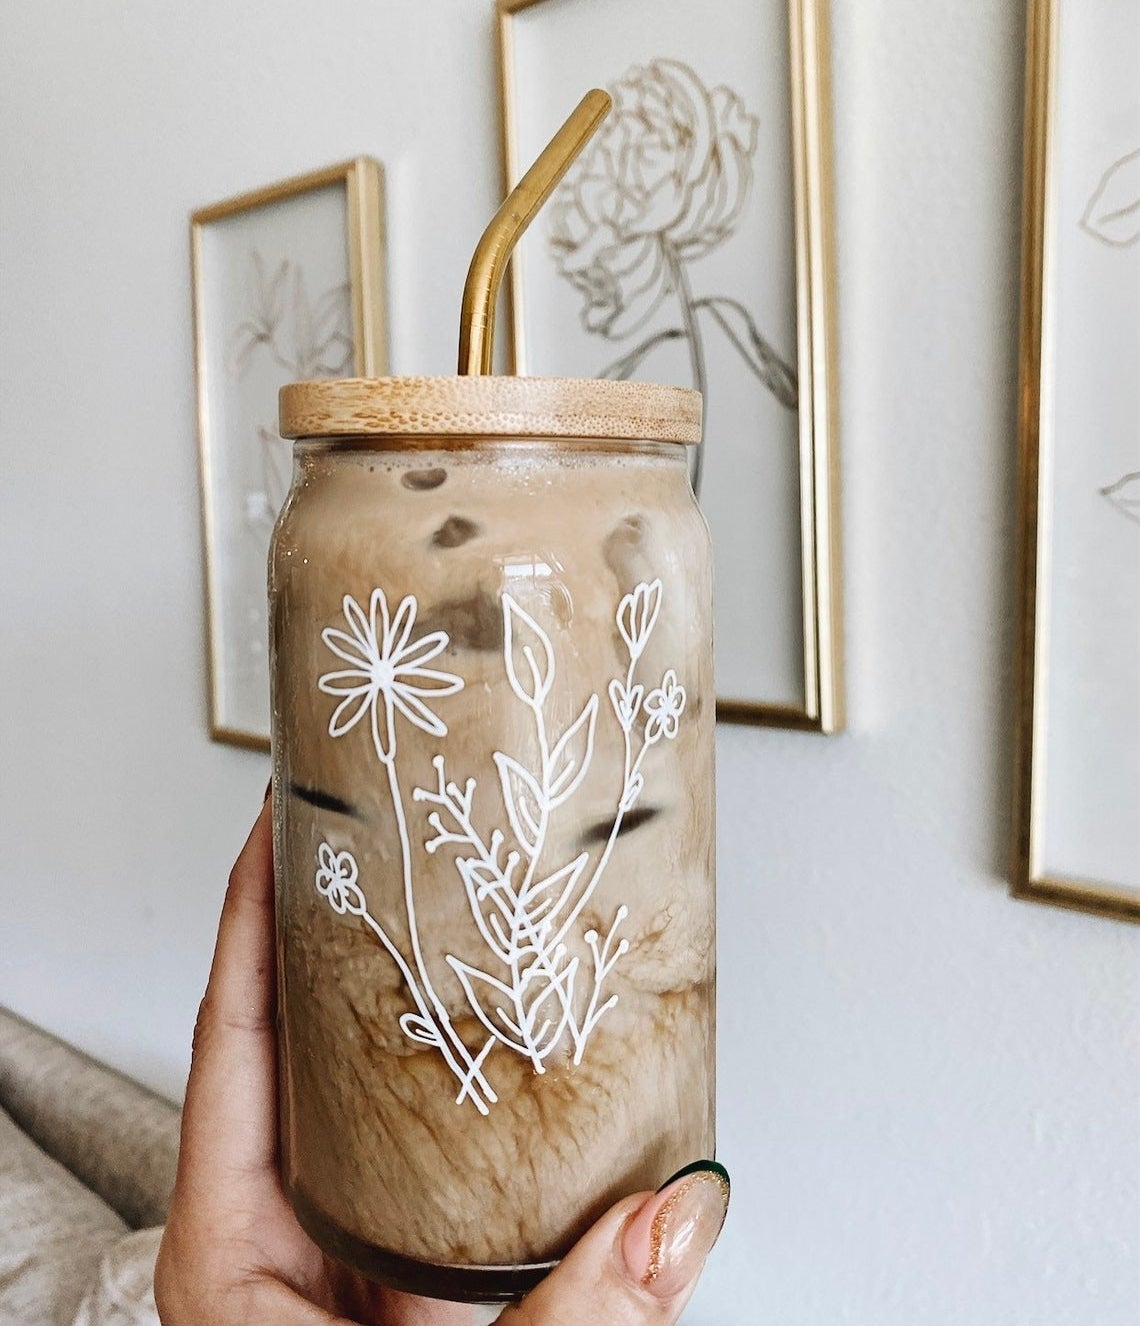 Hand holding the iced coffee glass with floral print